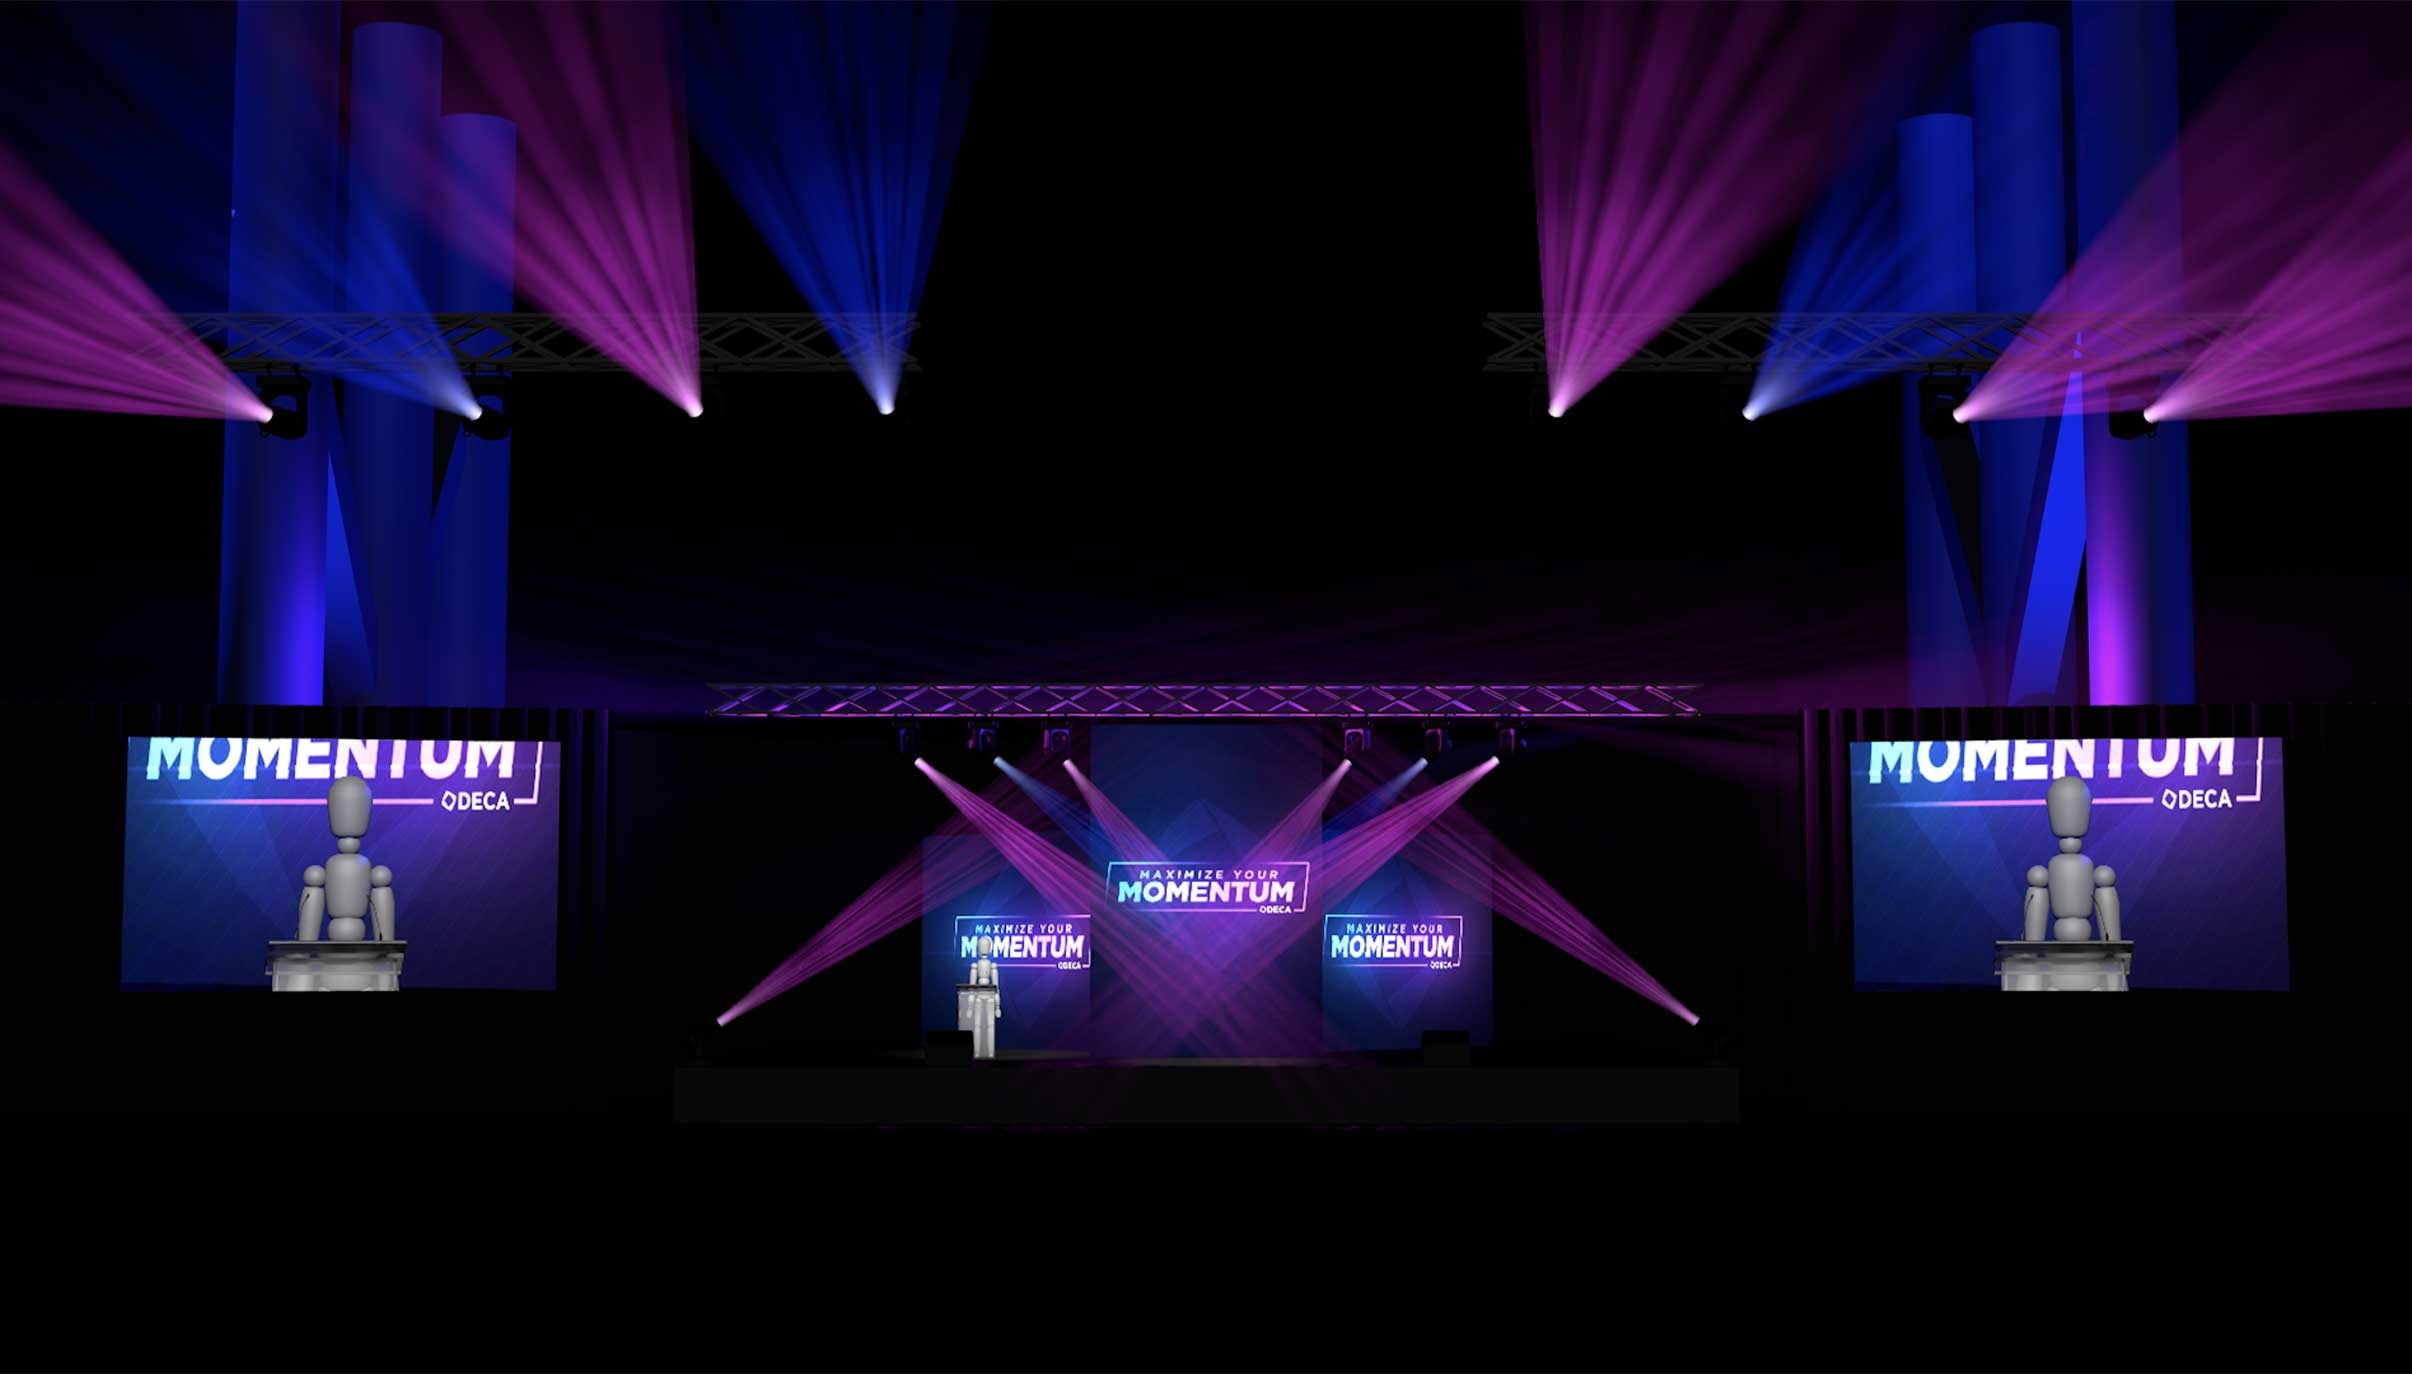 Digital render of the stage with blue and purple lighting